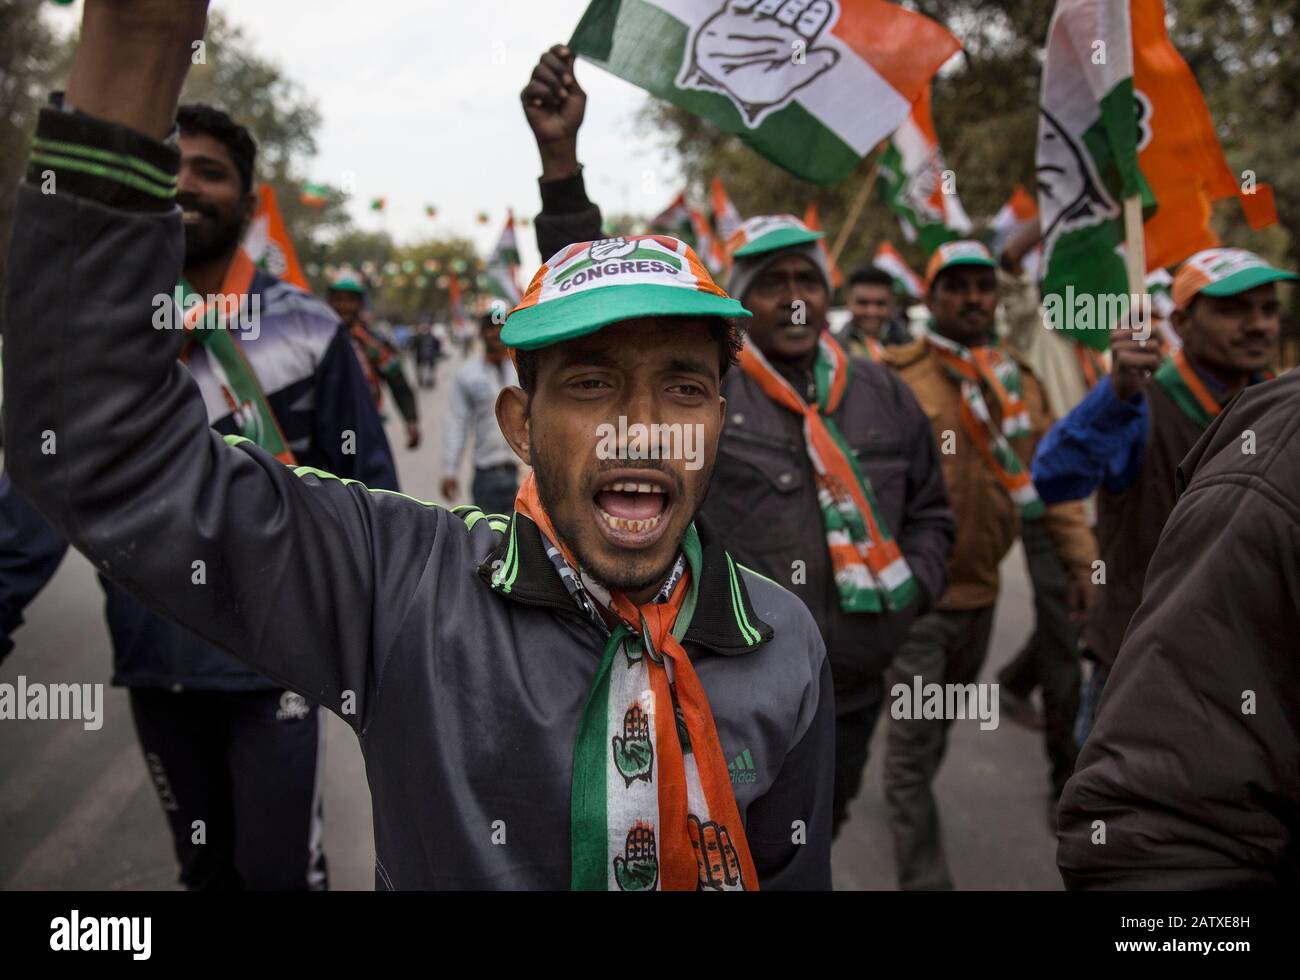 New Delhi, India. 5th Feb, 2020. Supporters of Indian National Congress (INC) shout slogans during an election campaign in New Delhi, India, Feb. 5, 2020. Campaigning for upcoming local elections here in the Indian capital reached a crescendo on Wednesday as different political parties are trying hard to woo voters to their side. Credit: Javed Dar/Xinhua/Alamy Live News Stock Photo